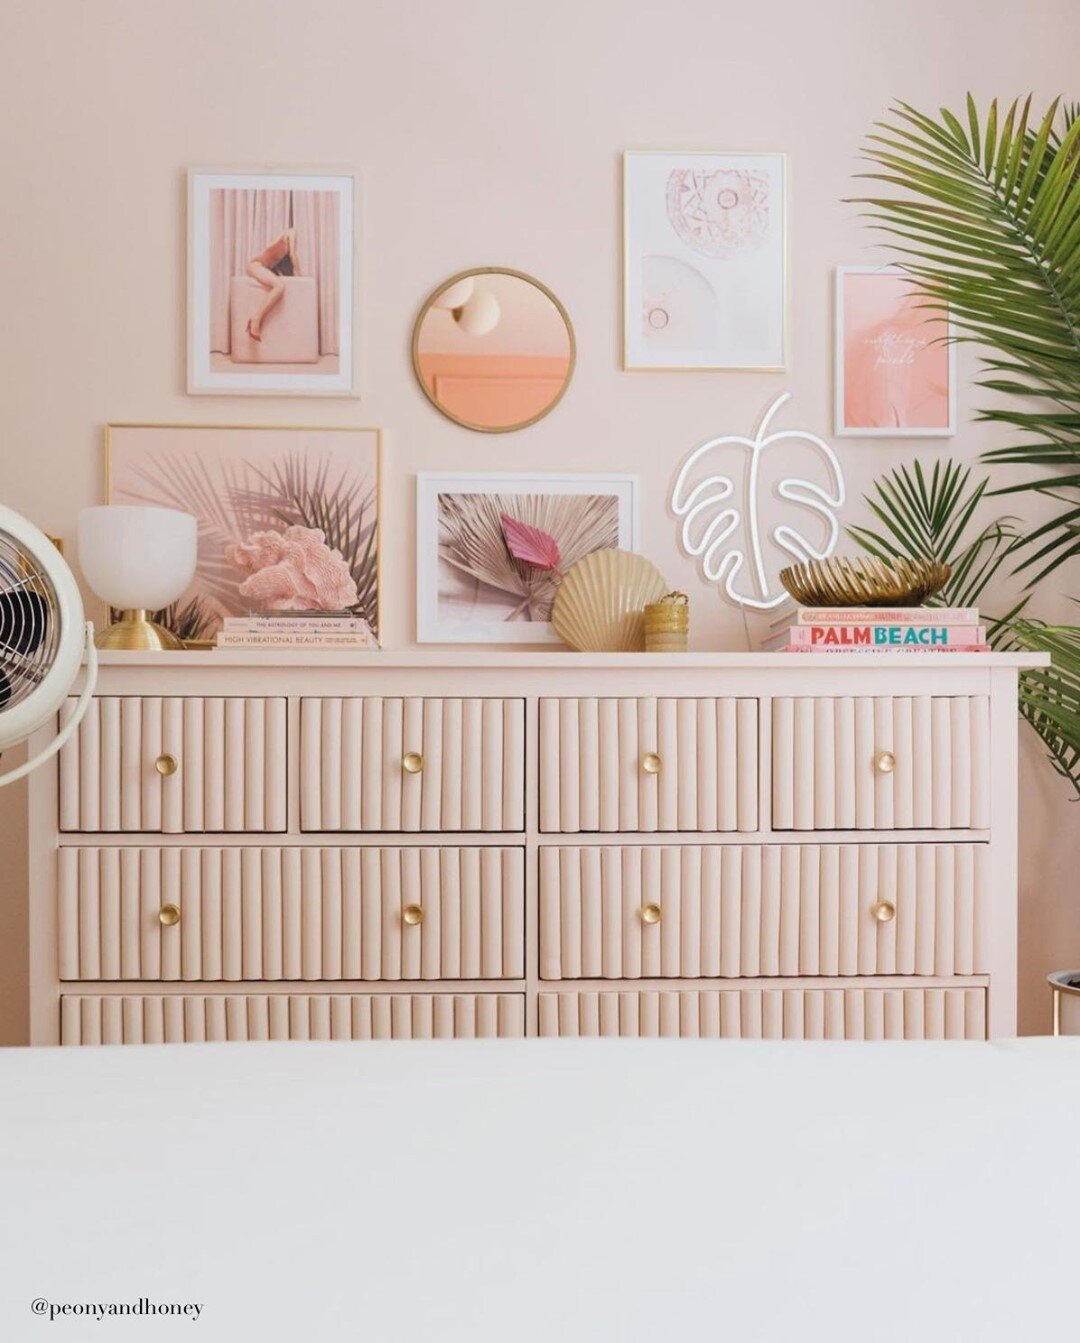 I've been inspired by this @peonyandhoney Ikea hack dresser to do something to my own Ikea dressers and wardrobes I got 10 years ago when I first moved to Brooklyn! Ok, actually when I first moved to Brooklyn I had no furniture at all except for an a